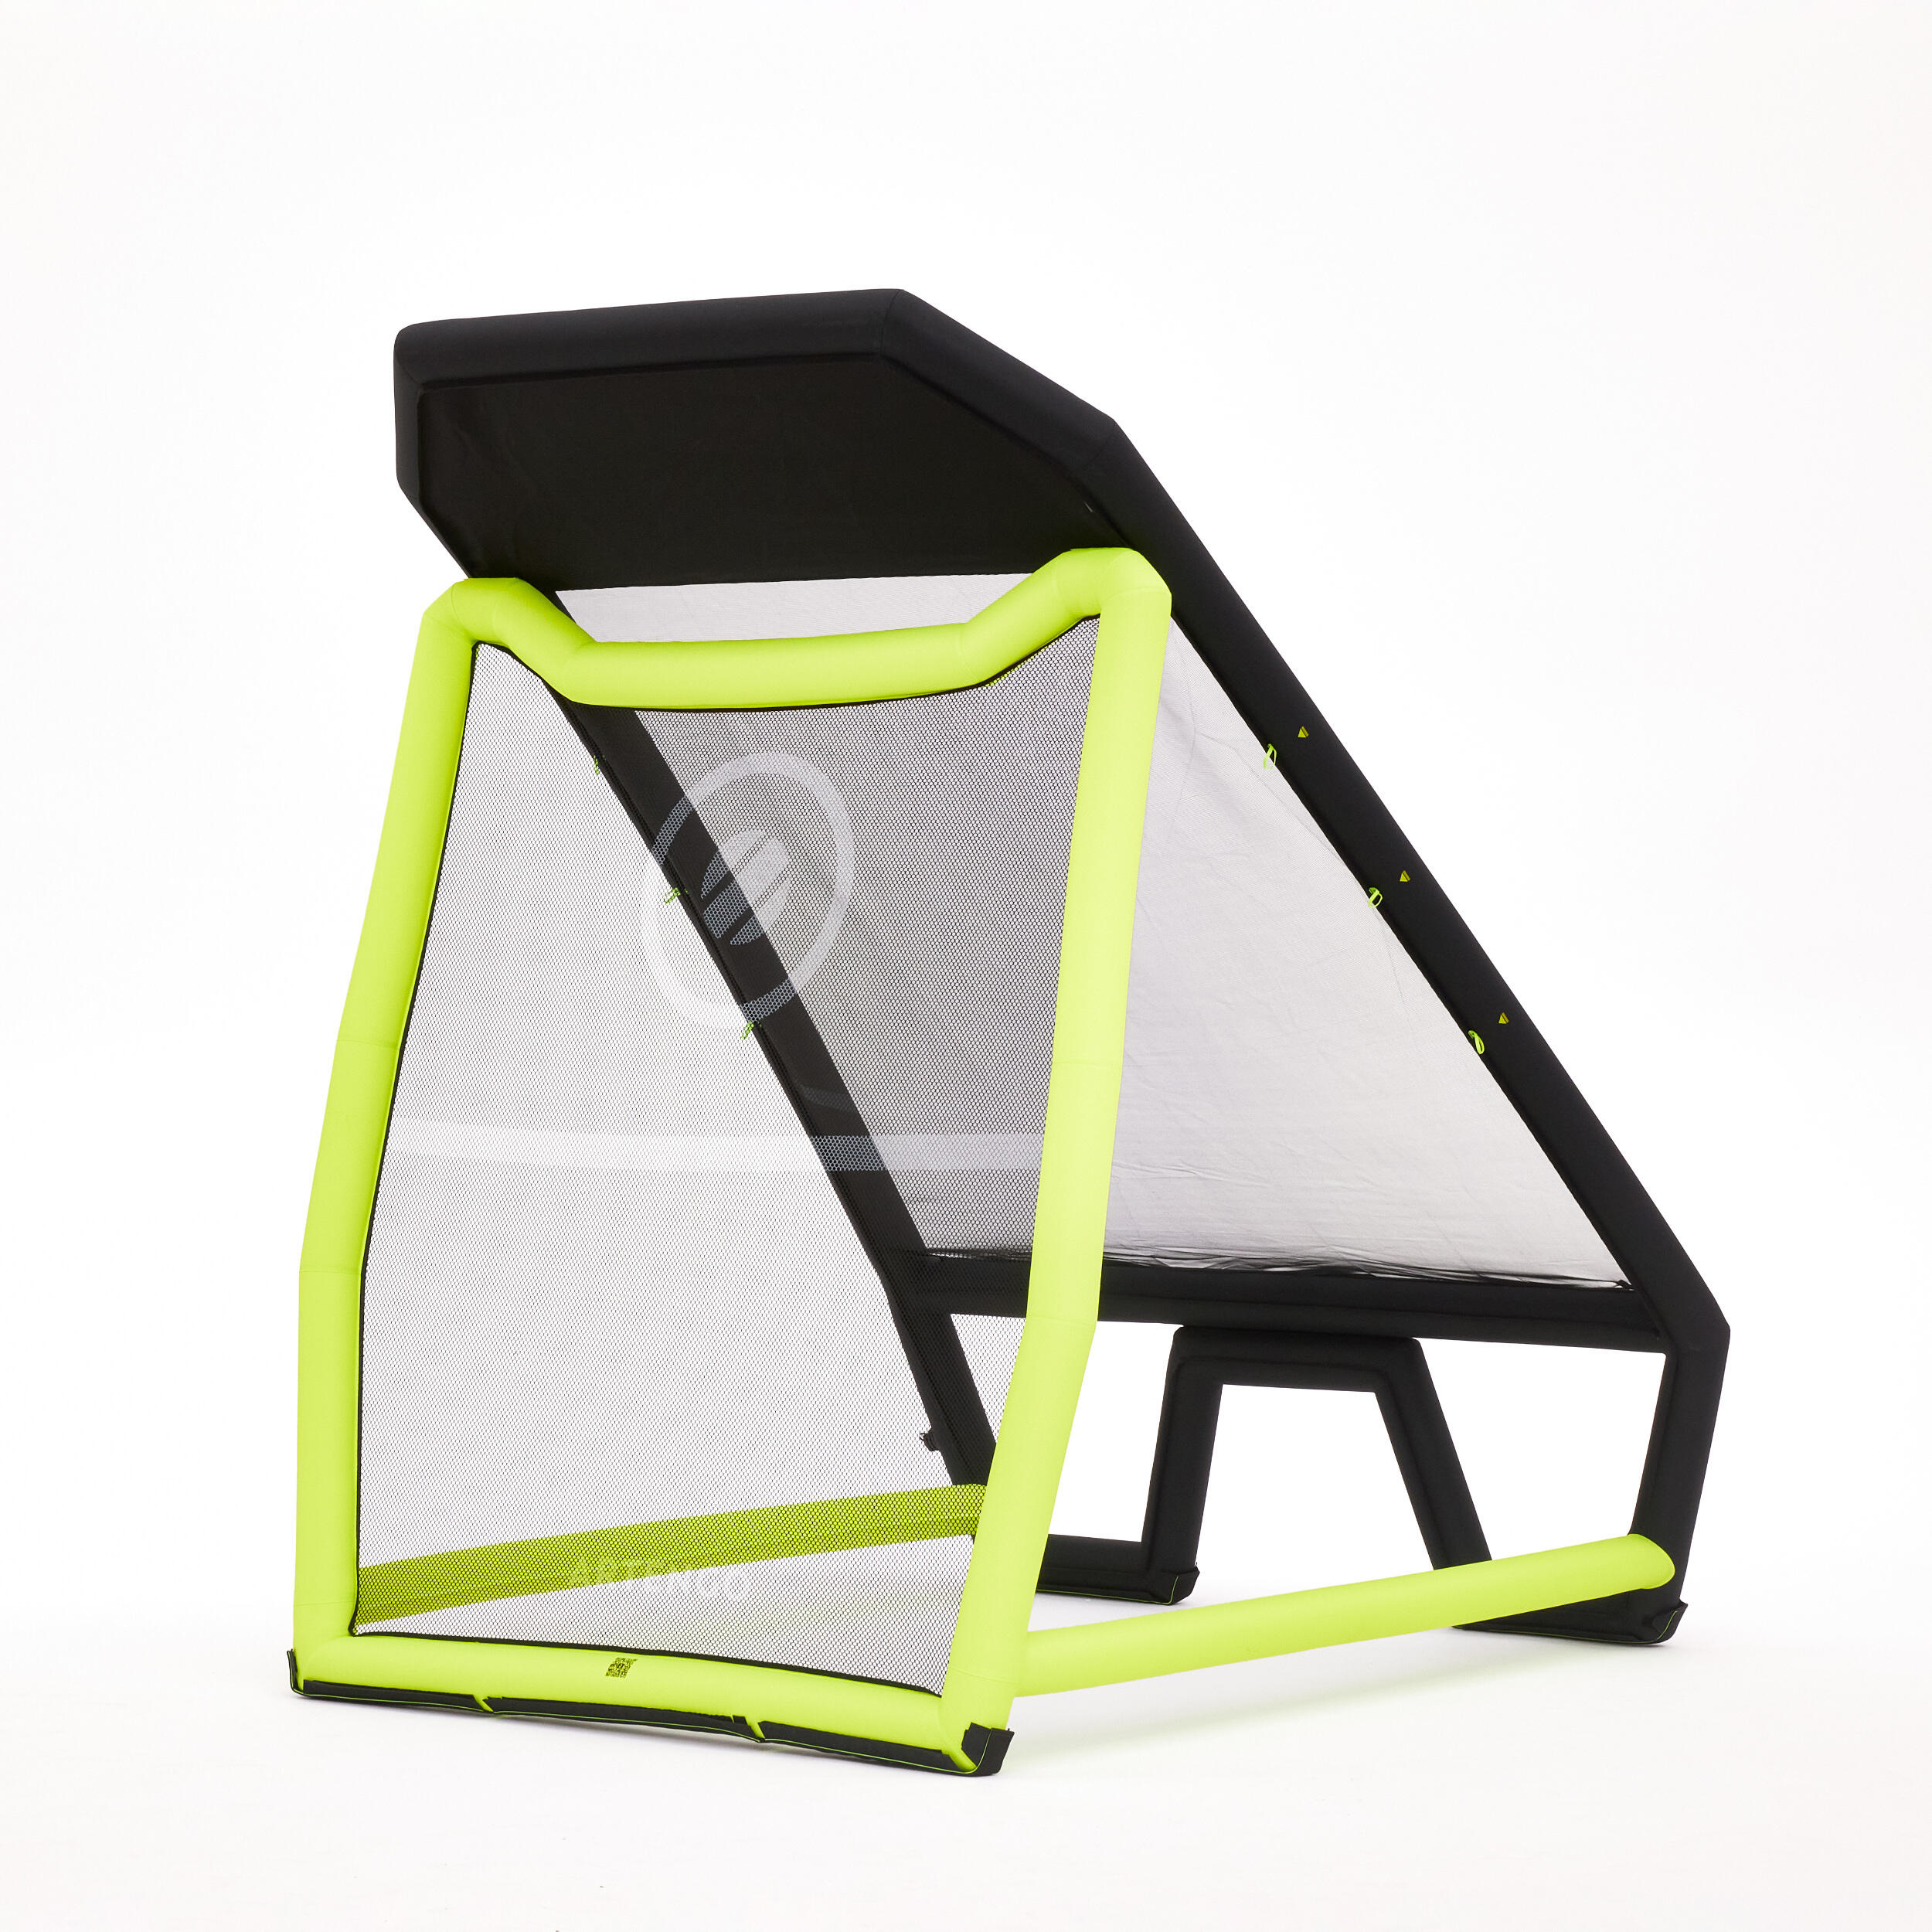 Compact Two-Sided Tennis Training Wall - Black/Yellow 10/10